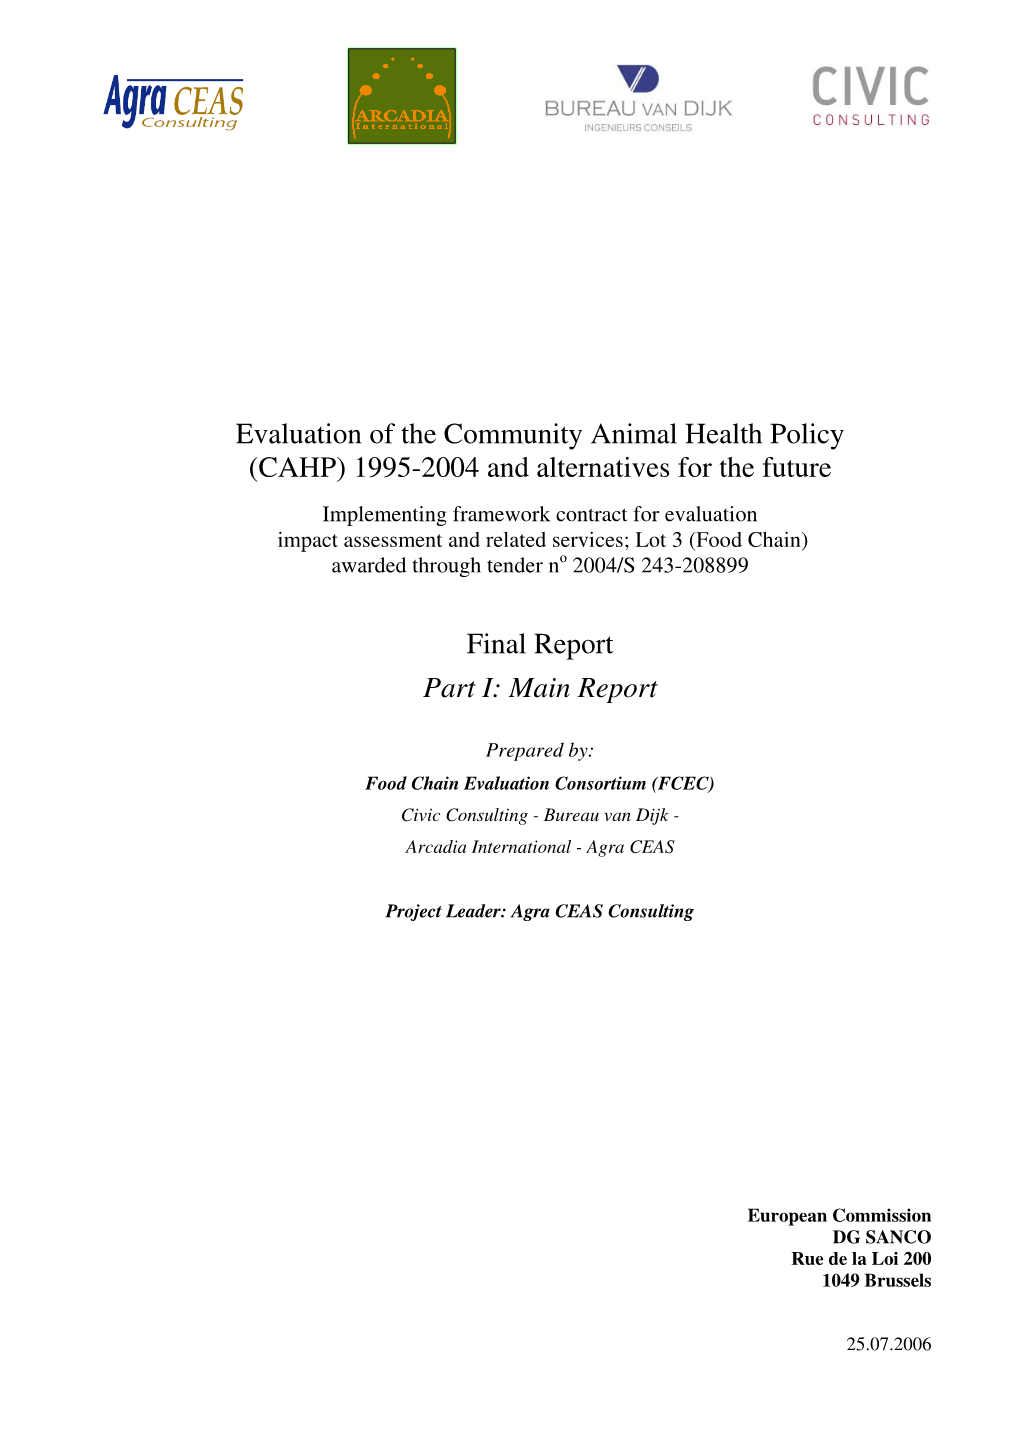 Evaluation of the Community Animal Health Policy (CAHP)